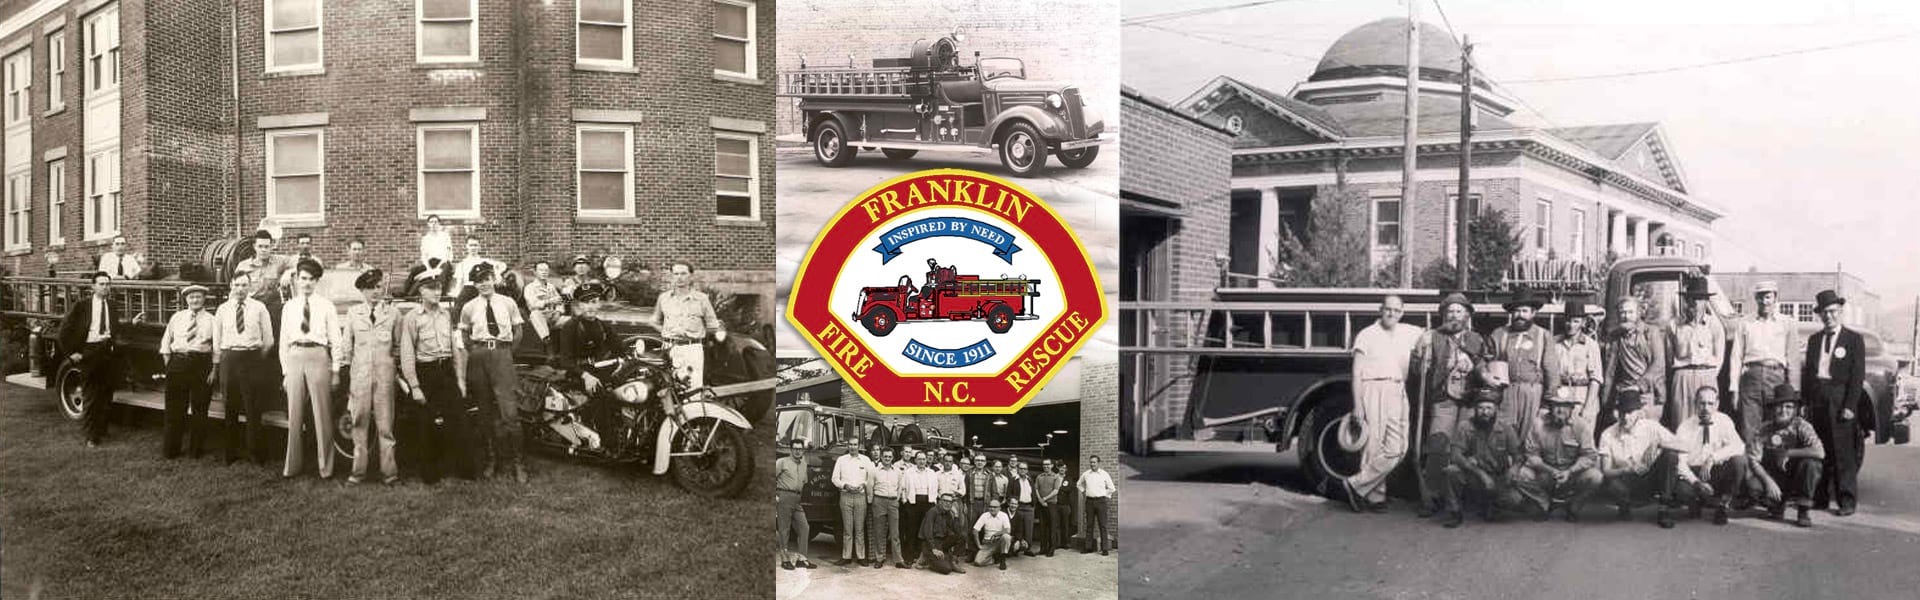 Franklin NC Fire Department History